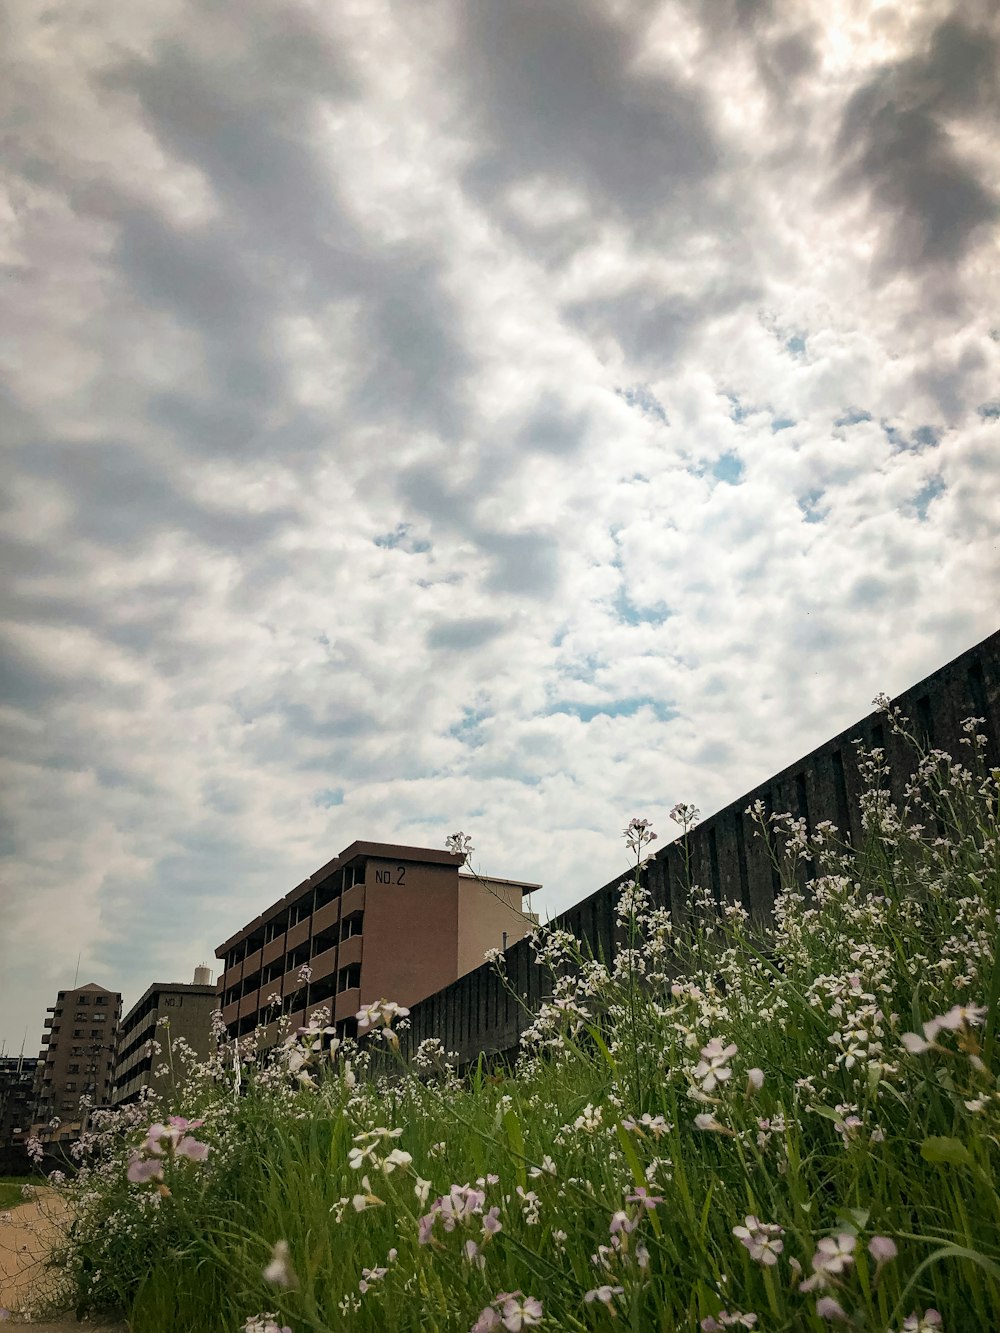 white flowers under cloudy sky during daytime